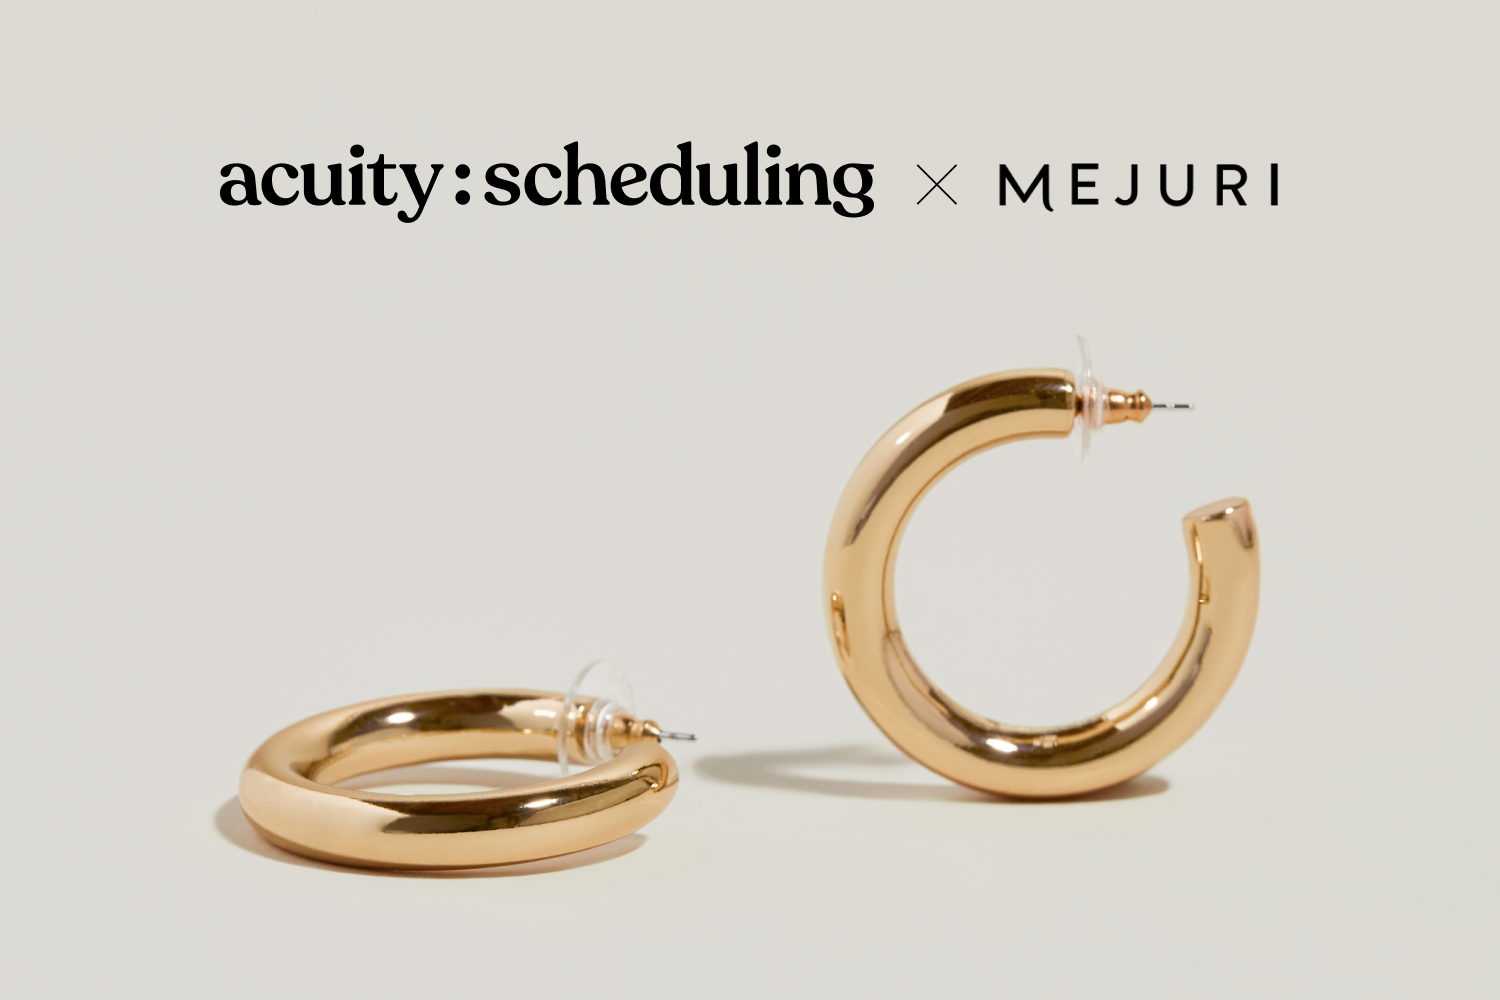 Acuity Scheduling and Mejuri logos above gold earrings